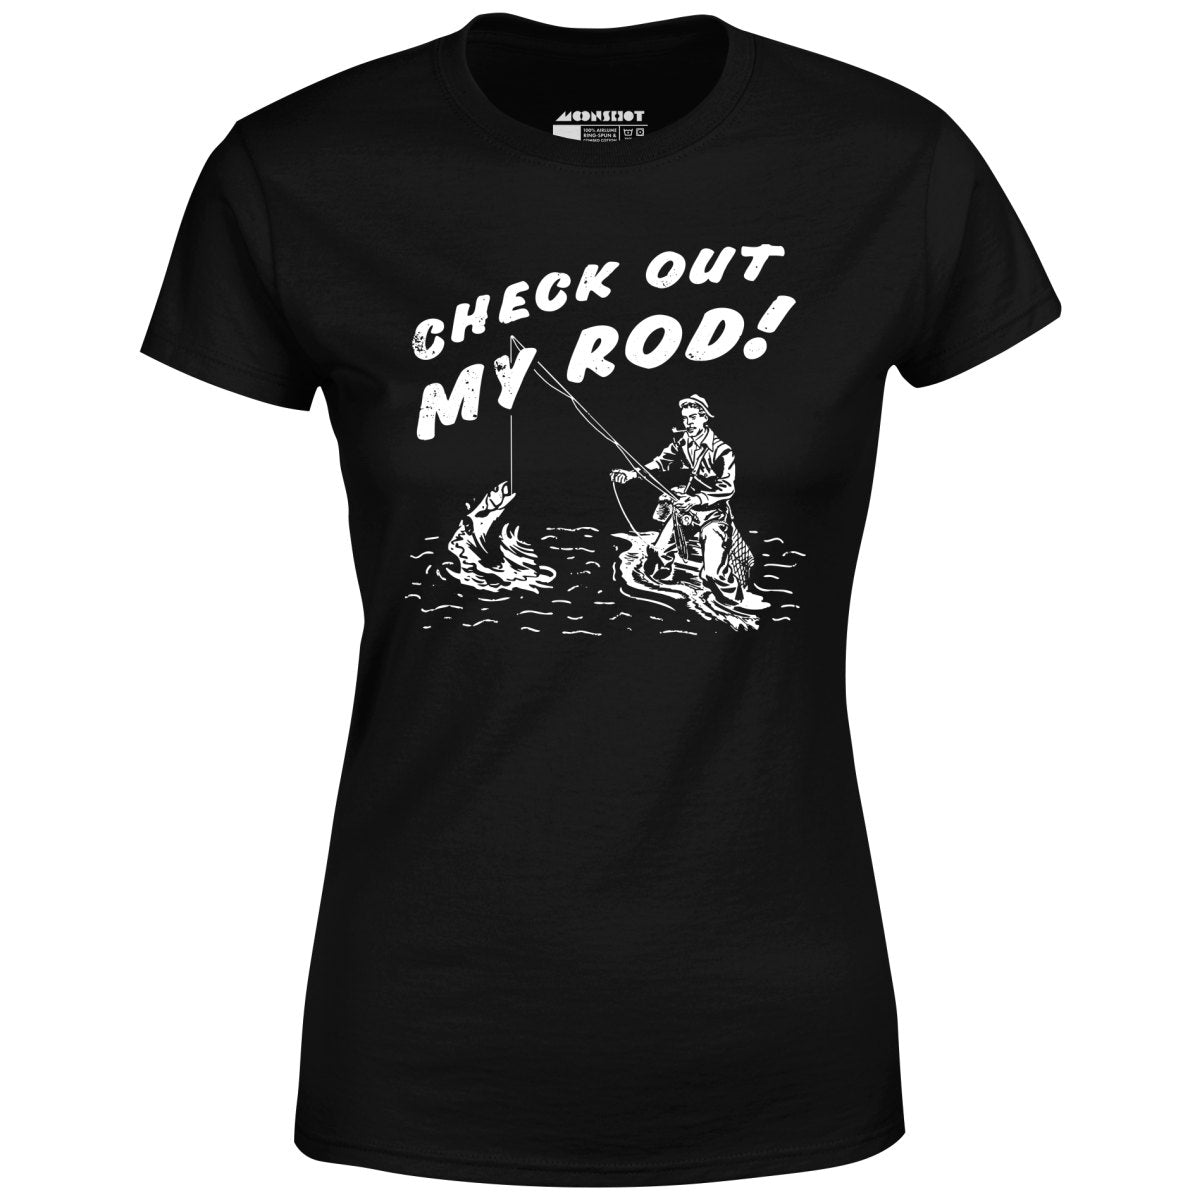 Check Out My Rod - Women's T-Shirt